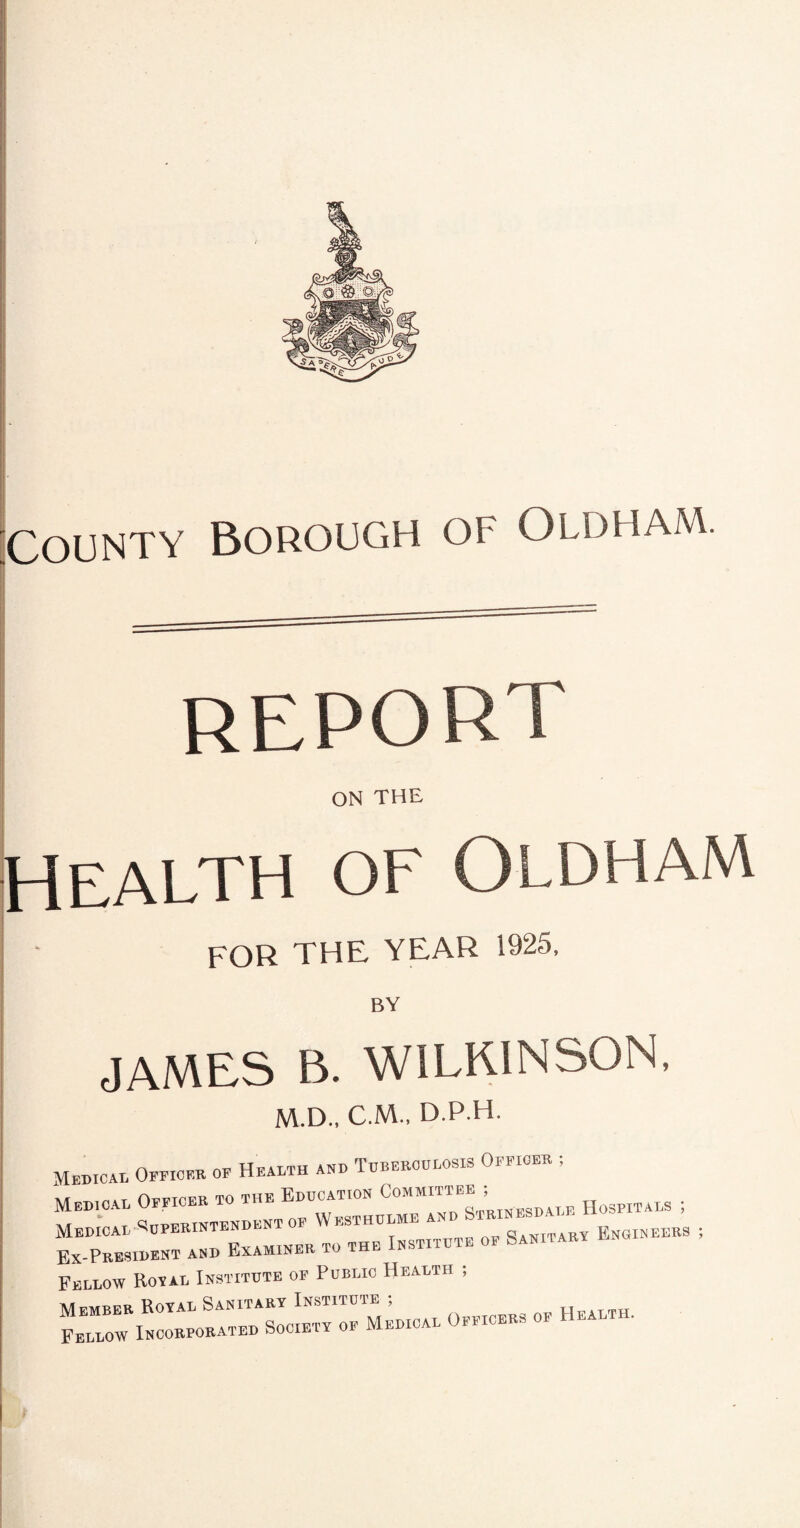 report ON THE Health os' Oldham FOR THE YEAR 1925, BY JAMES B. WILKINSON. M.D., C.M., D.P.H. Medical Office* of Health aid Tubehoulosis Office* ; _ iviMivrpH to the Institute of oanii ak y Ex-President and Examiner to m Fellow Royal Institute of Public Health ; I-—«— -